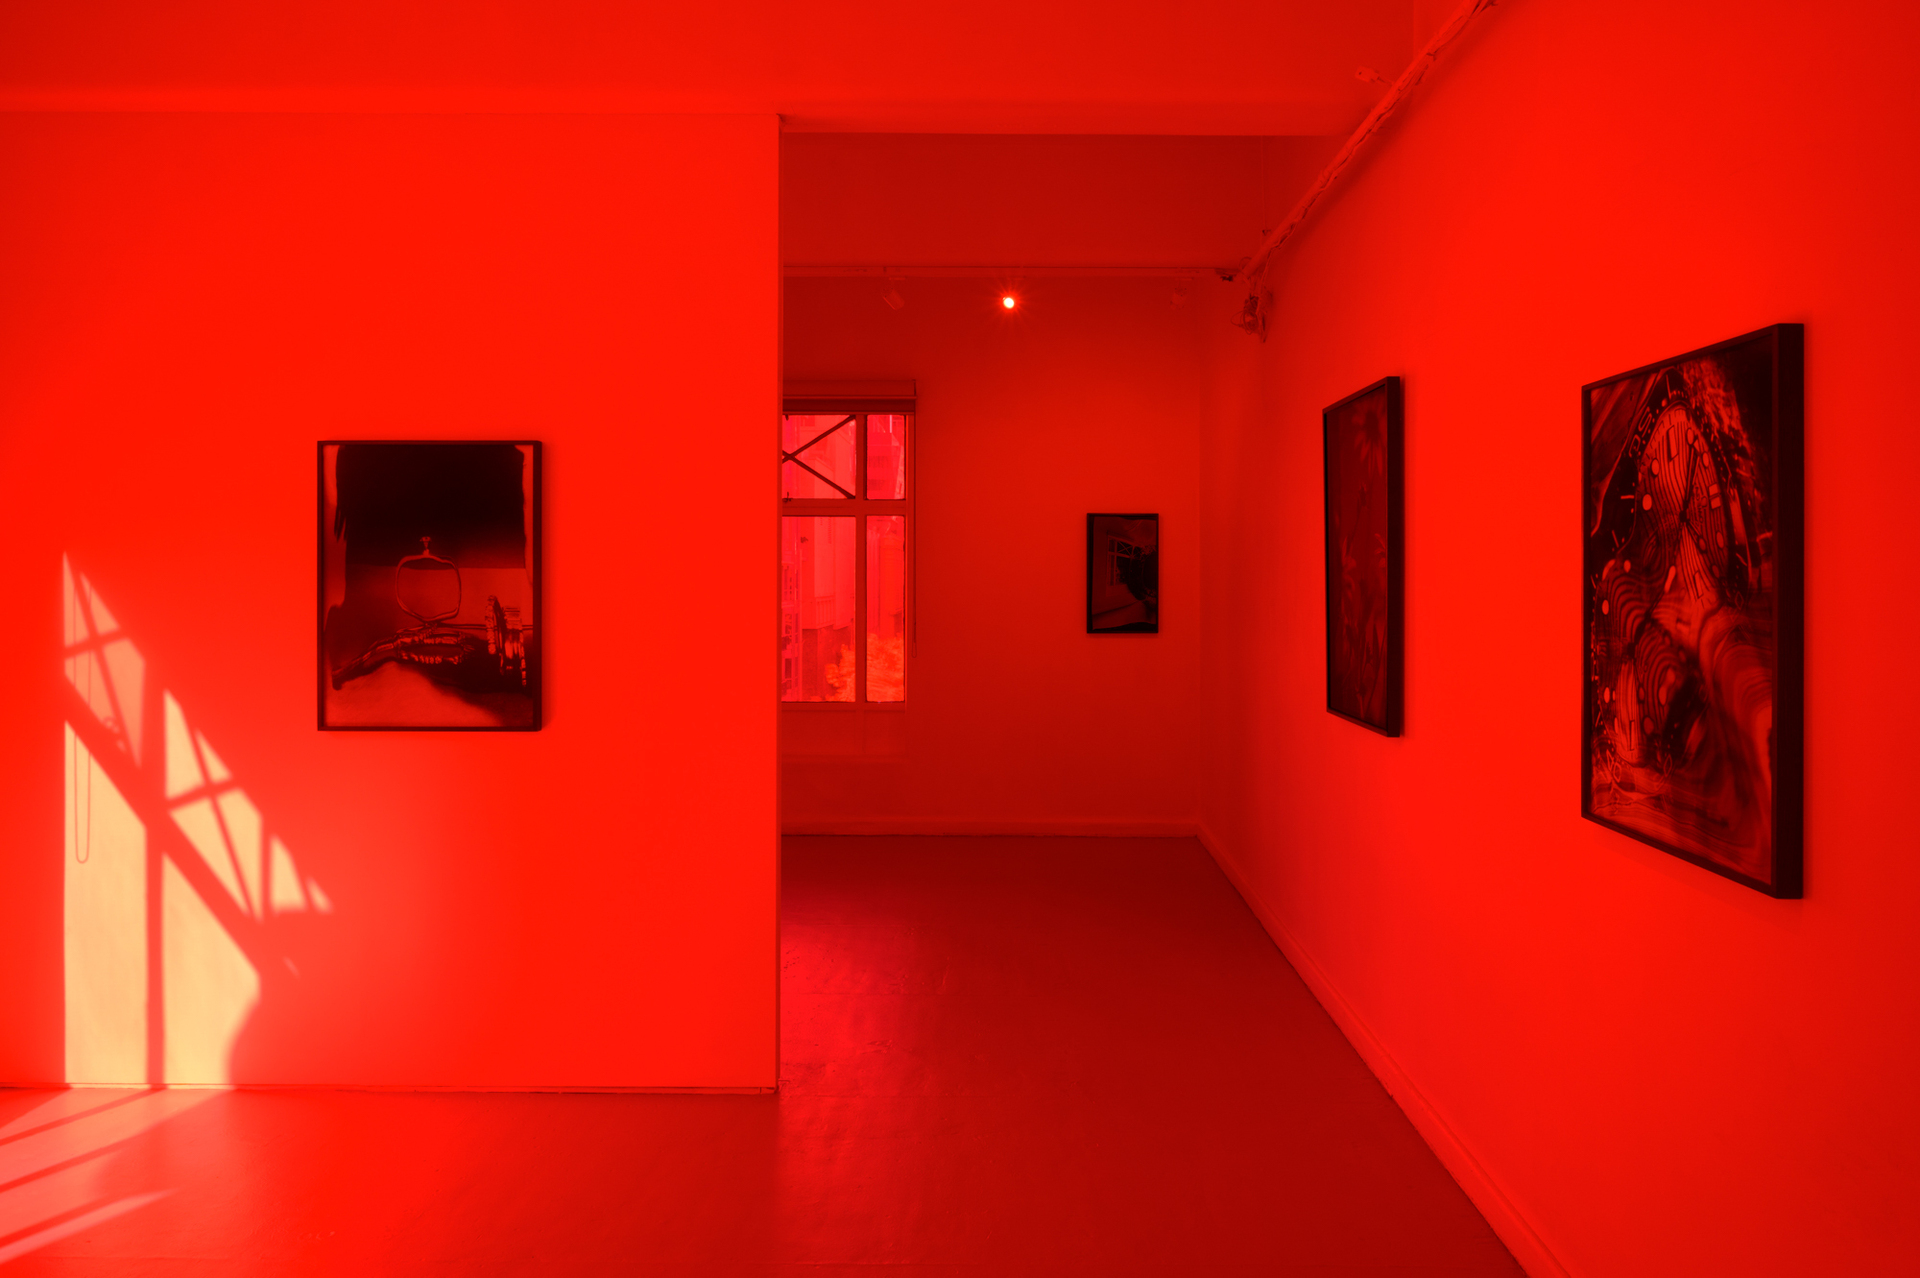 Aaron Christophe Rees, Horizon, 2021, Installation view with tinted windows 1, 2021.